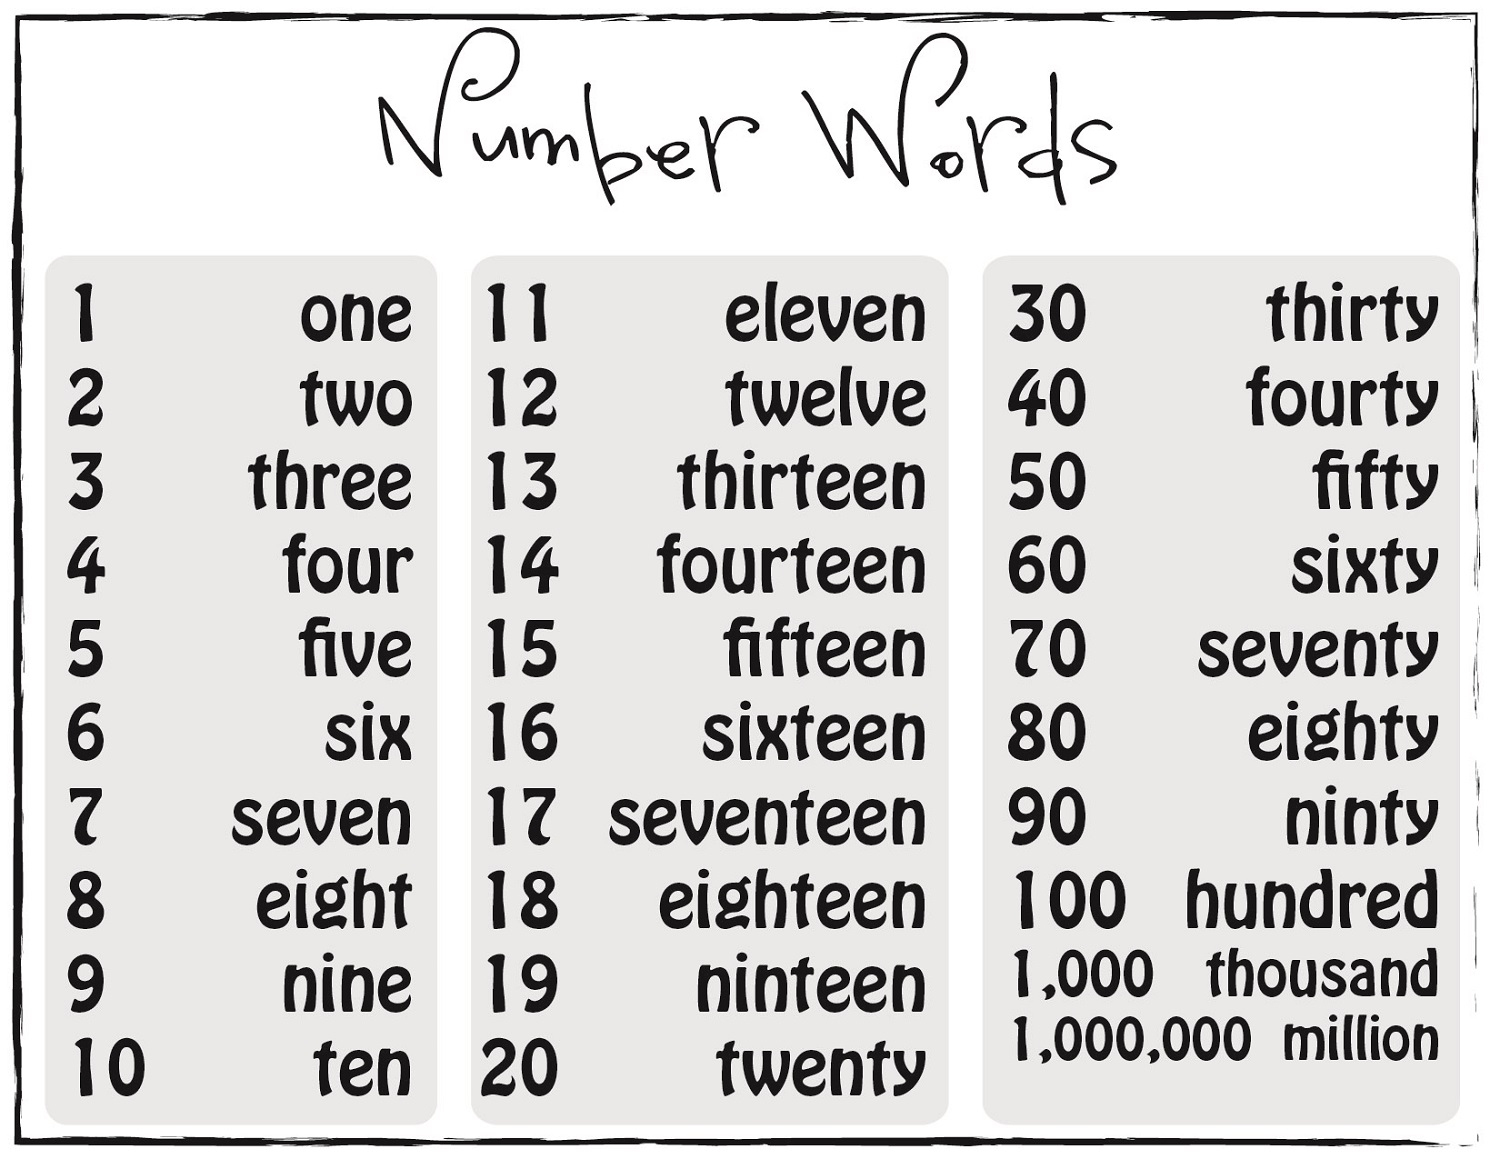 counting of words in microsoft word